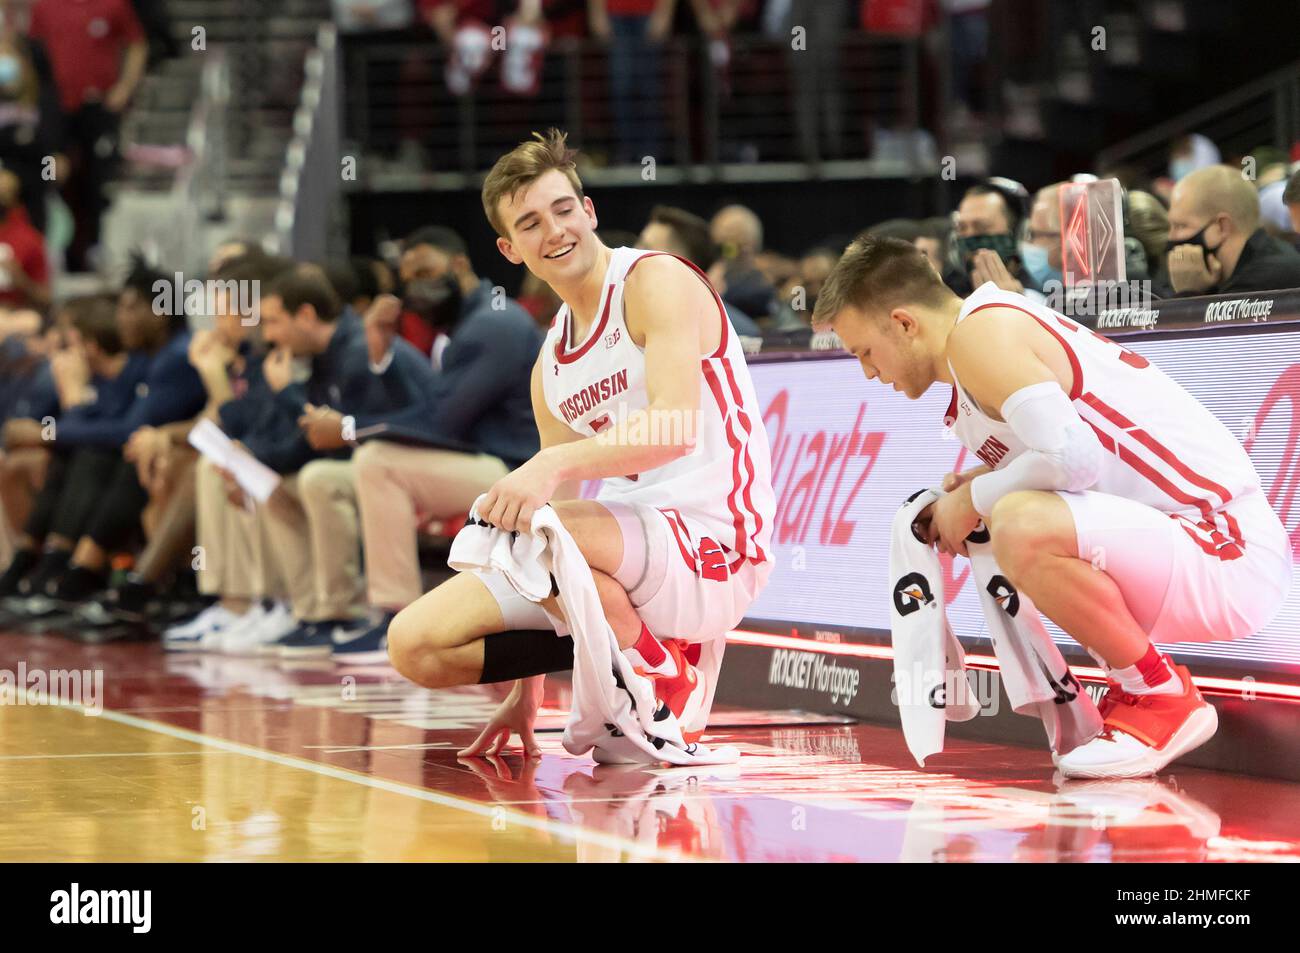 Madison, WI, USA. 5th Feb, 2022. Wisconsin Badgers forward Tyler Wahl #5 and Wisconsin Badgers guard Brad Davison #34 wait to come into the game during NCAA basketball game between the Penn State Nittany Lions and the Wisconsin Badgers at Kohl Center in Madison, WI. Wisconsin defeated Penn State 51-49. Kirsten Schmitt/CSM/Alamy Live News Stock Photo